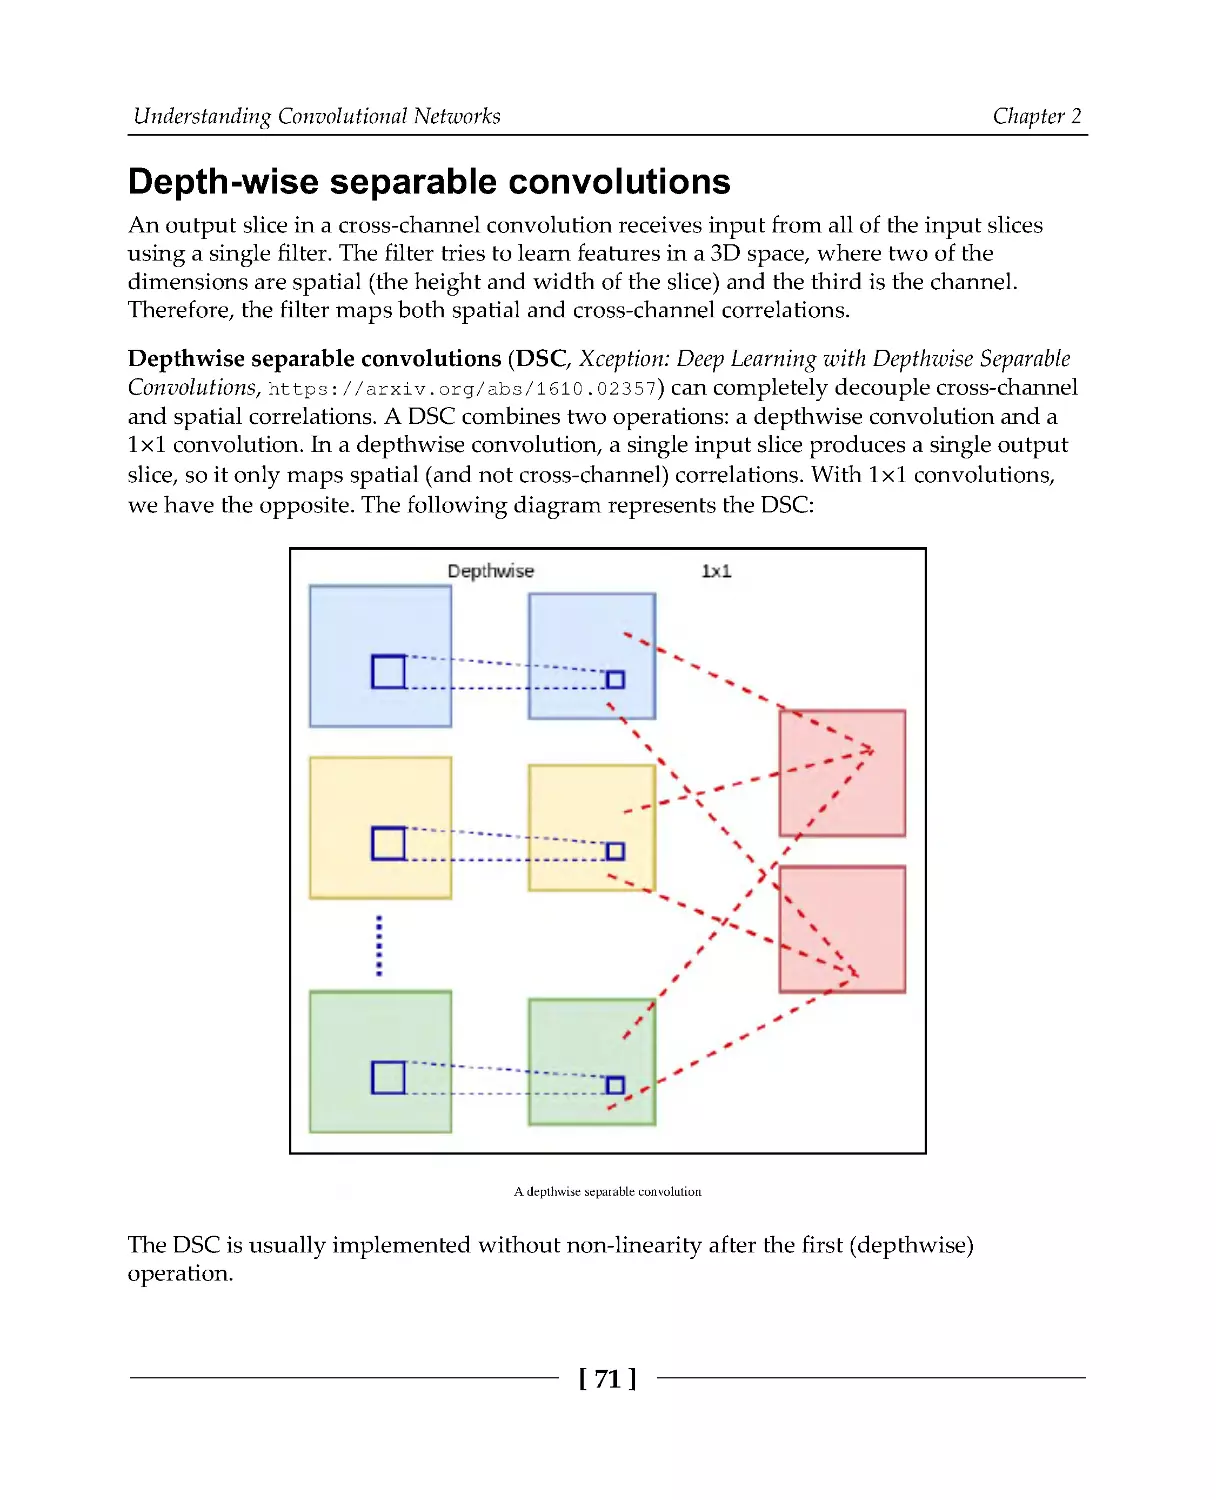 Depth-wise separable convolutions